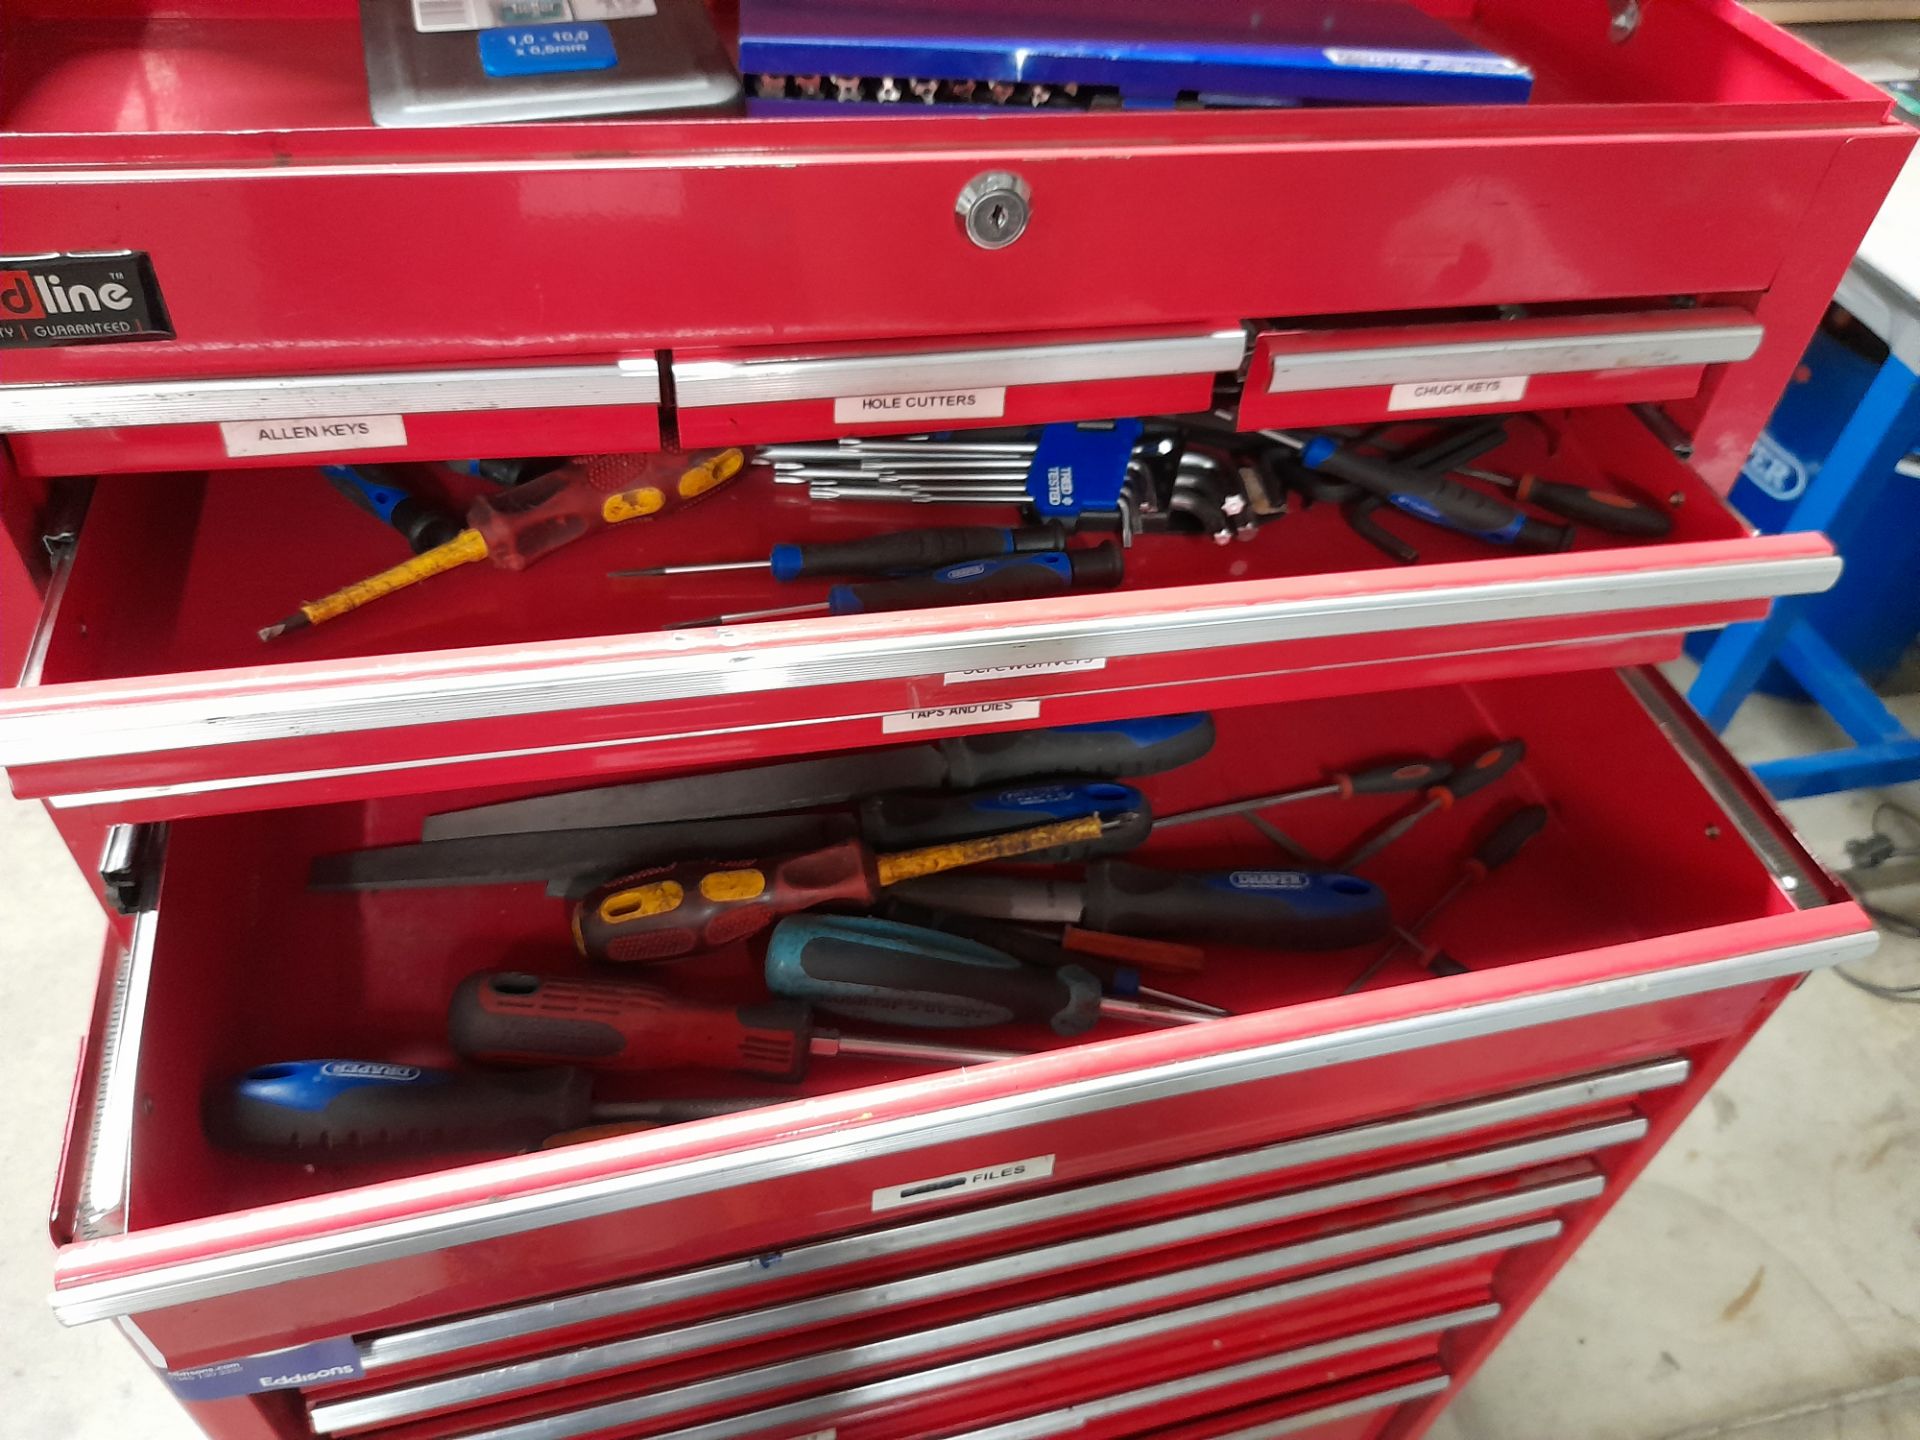 Redline mobile 6 drawer tool chest with contents - Image 3 of 4